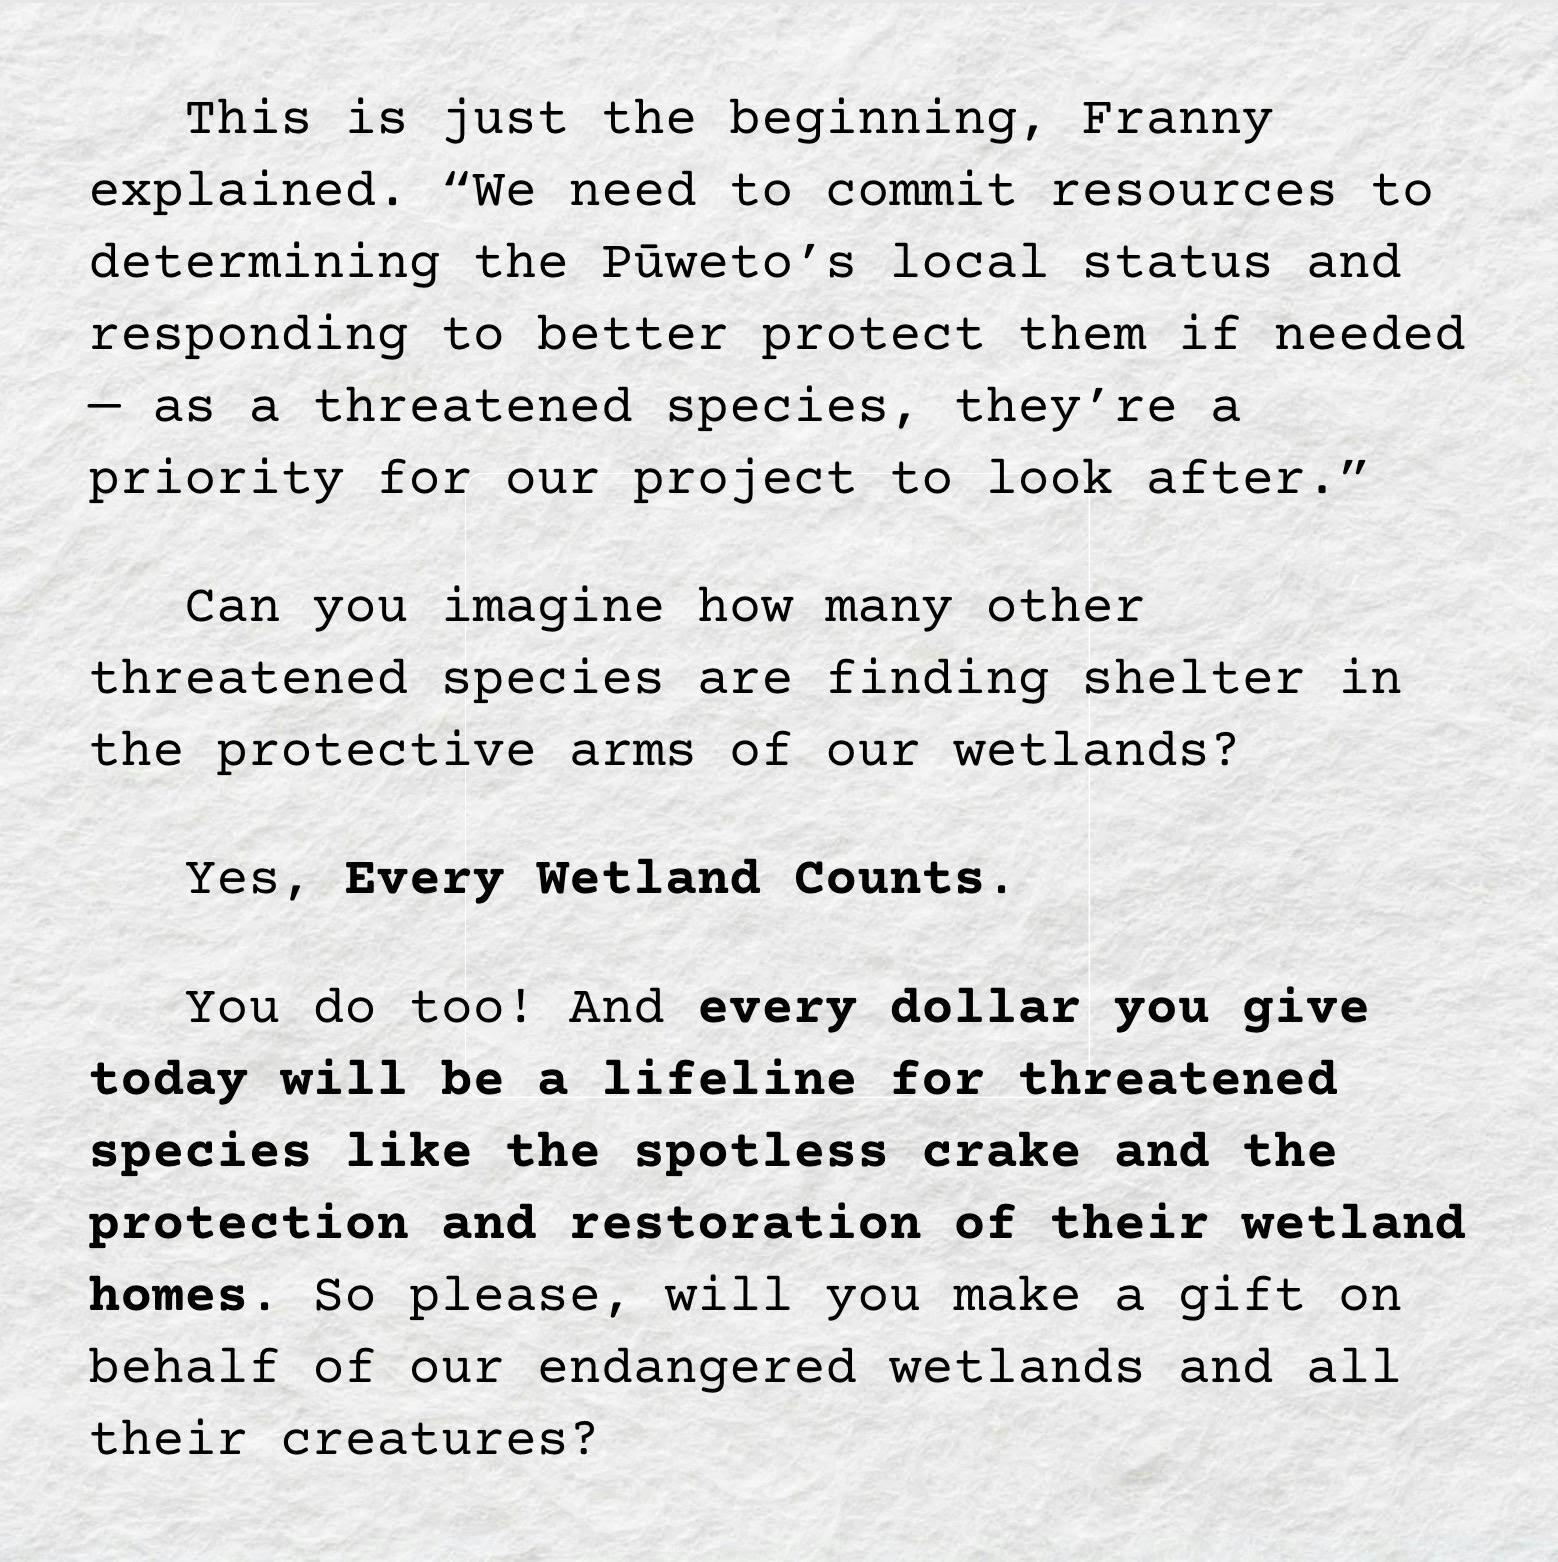 A screenshot of the text: "This is just the beginning, Franny explained. “We need to commit resources to determining the Pūweto’s local status and responding to better protect them if needed — as a threatened species, they’re a priority for our project to look after.” Can you imagine how many other threatened species are finding shelter in the protective arms of our wetlands? Yes, Every Wetland Counts. You do too! And every dollar you give today will be a lifeline for threatened species like the spotless crake and the protection and restoration of their wetland homes. So please, will you make a gift on behalf of our endangered wetlands and all their creatures?"